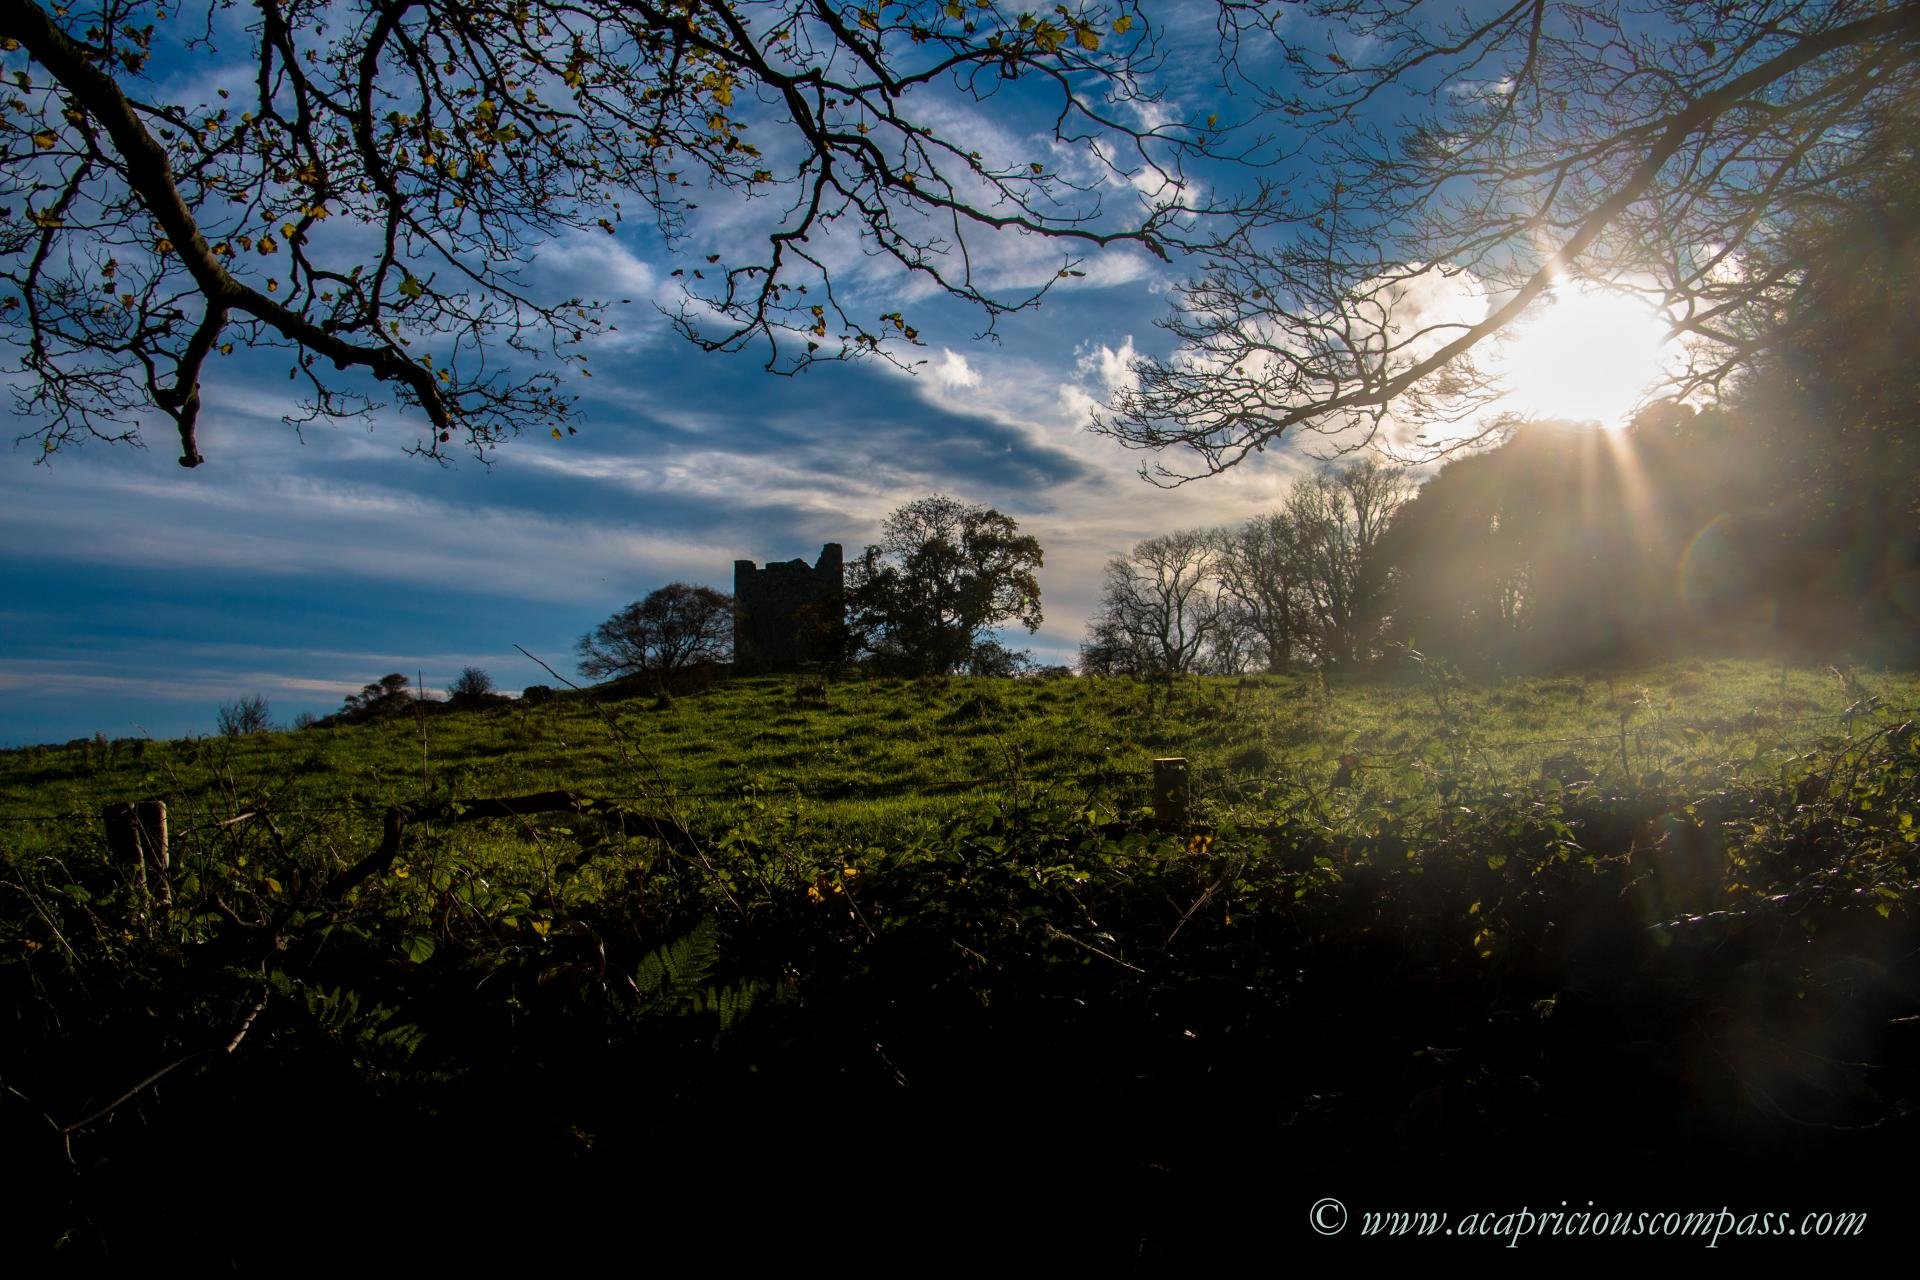 Audley’s castle in castle ward things to do in strangford